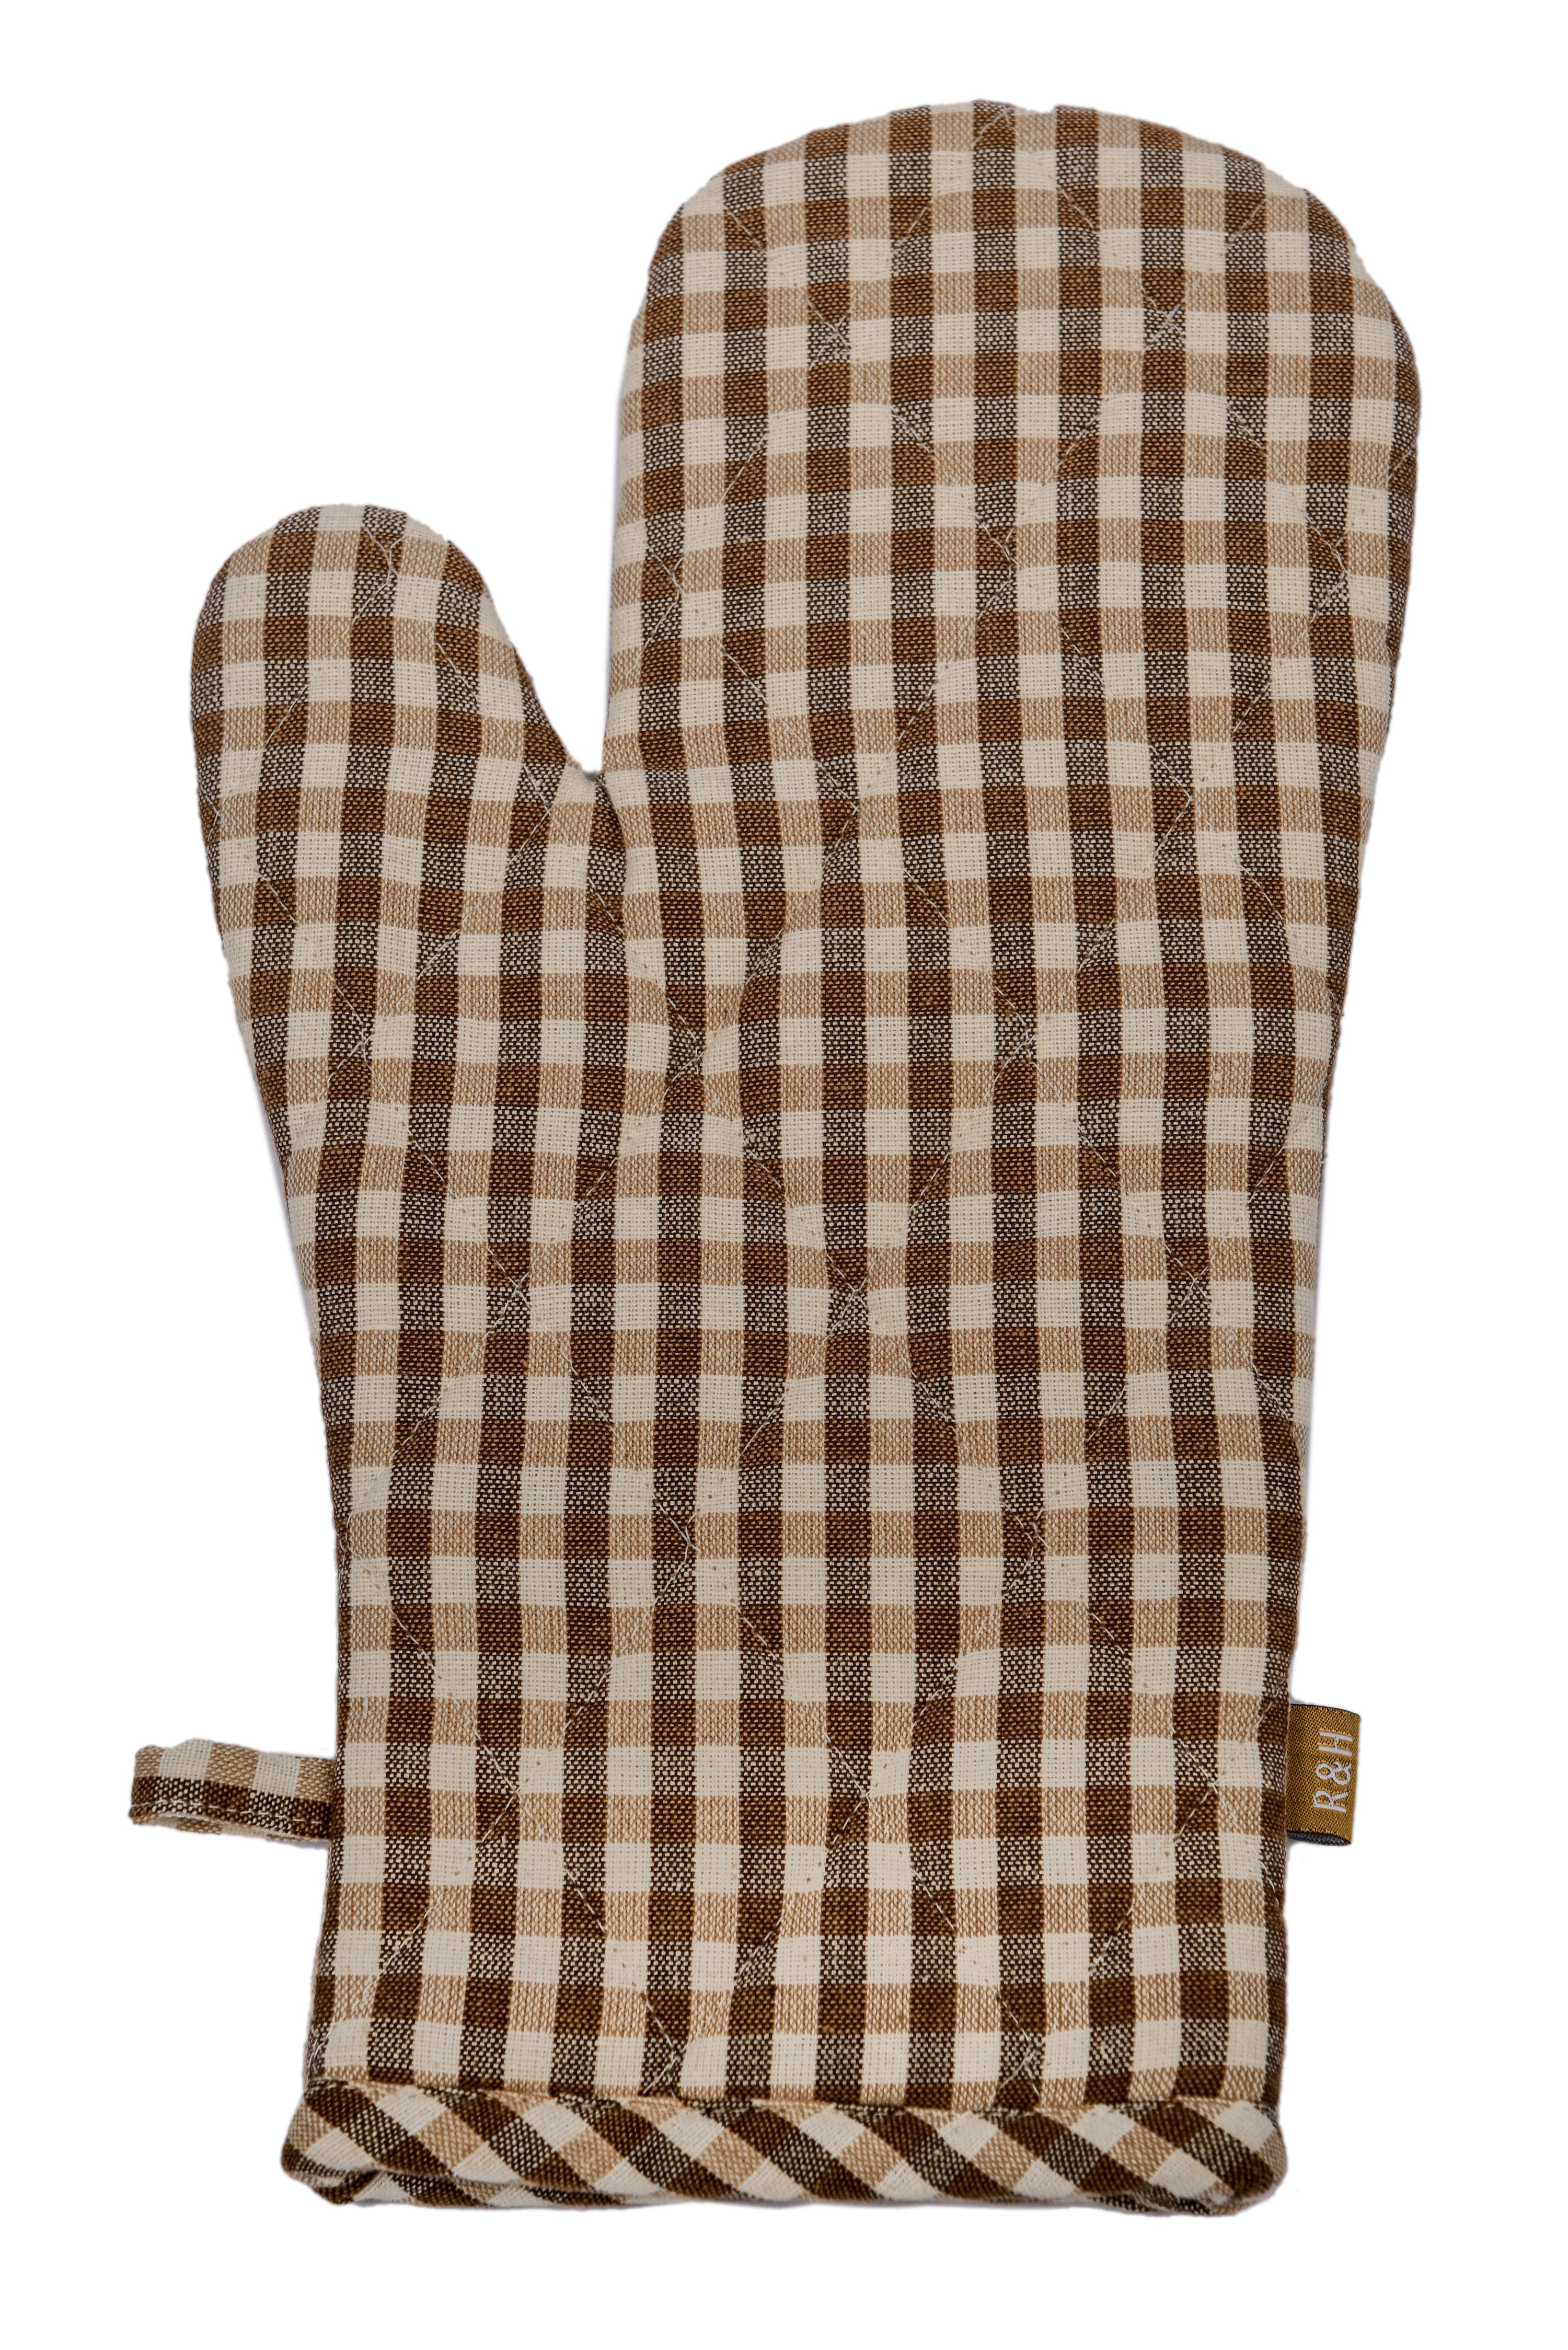 Gingham Oven Glove